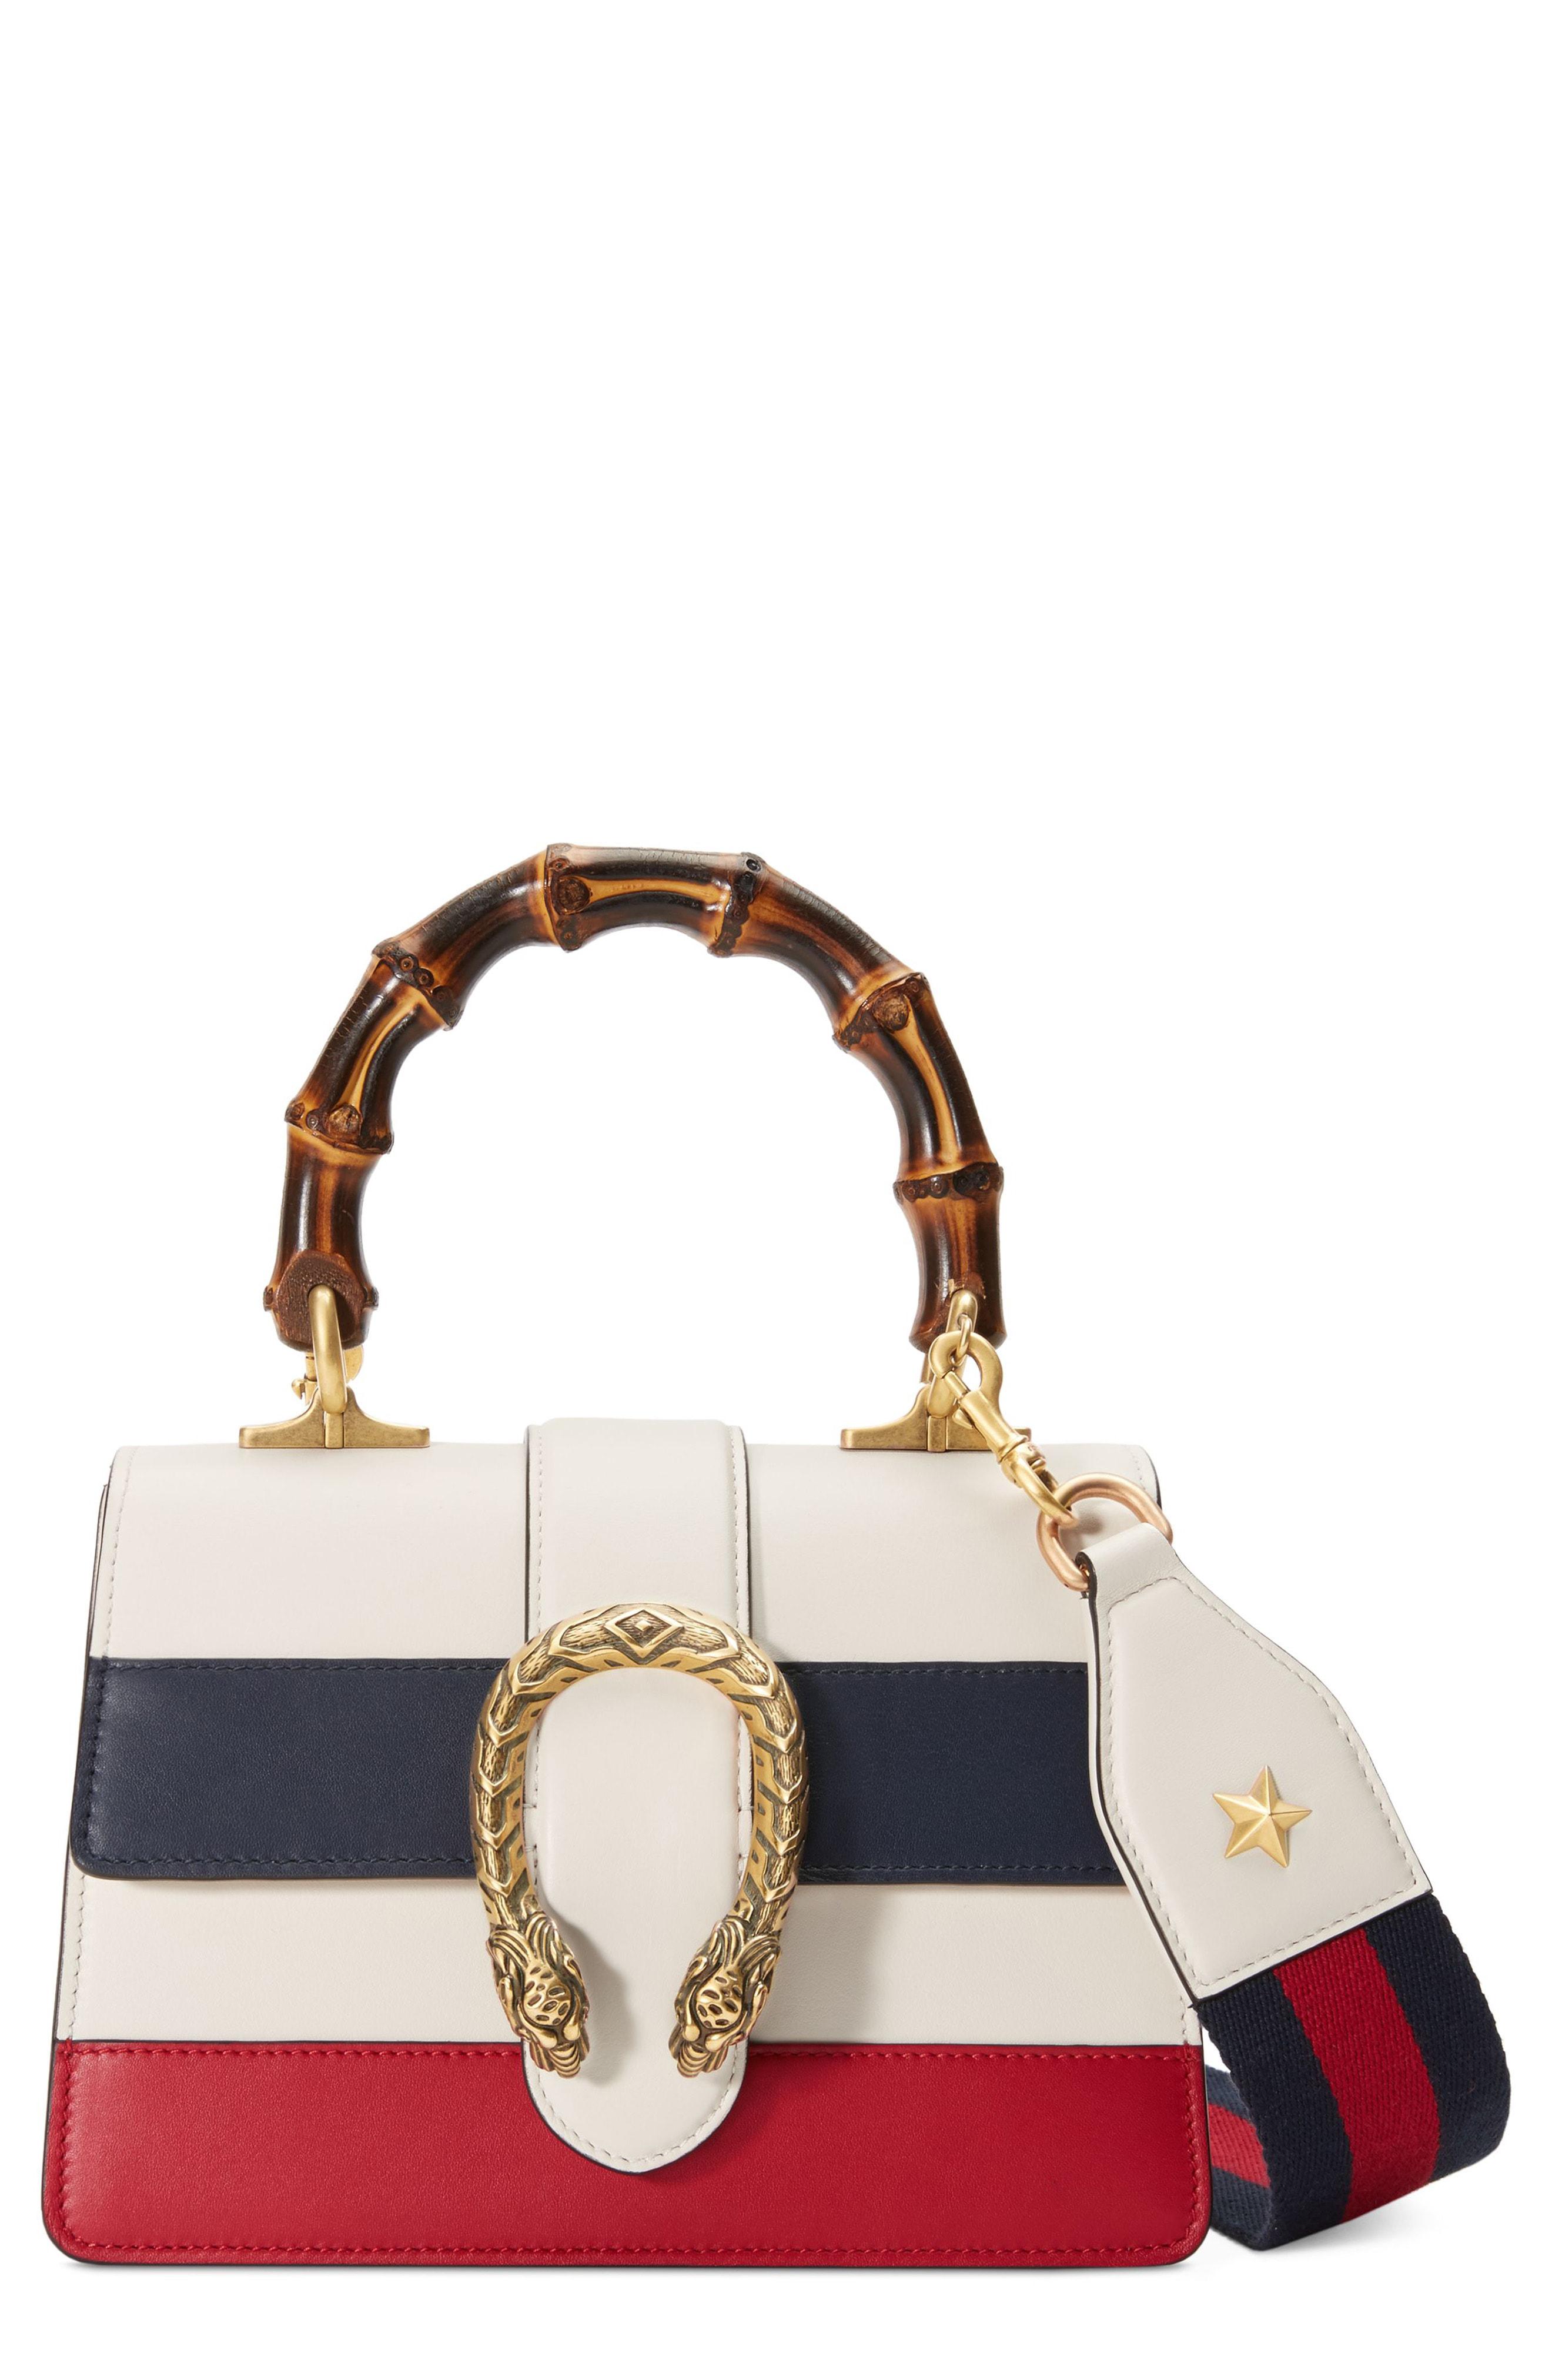 Lyst - Gucci Dionysus Leather Top Handle Bag